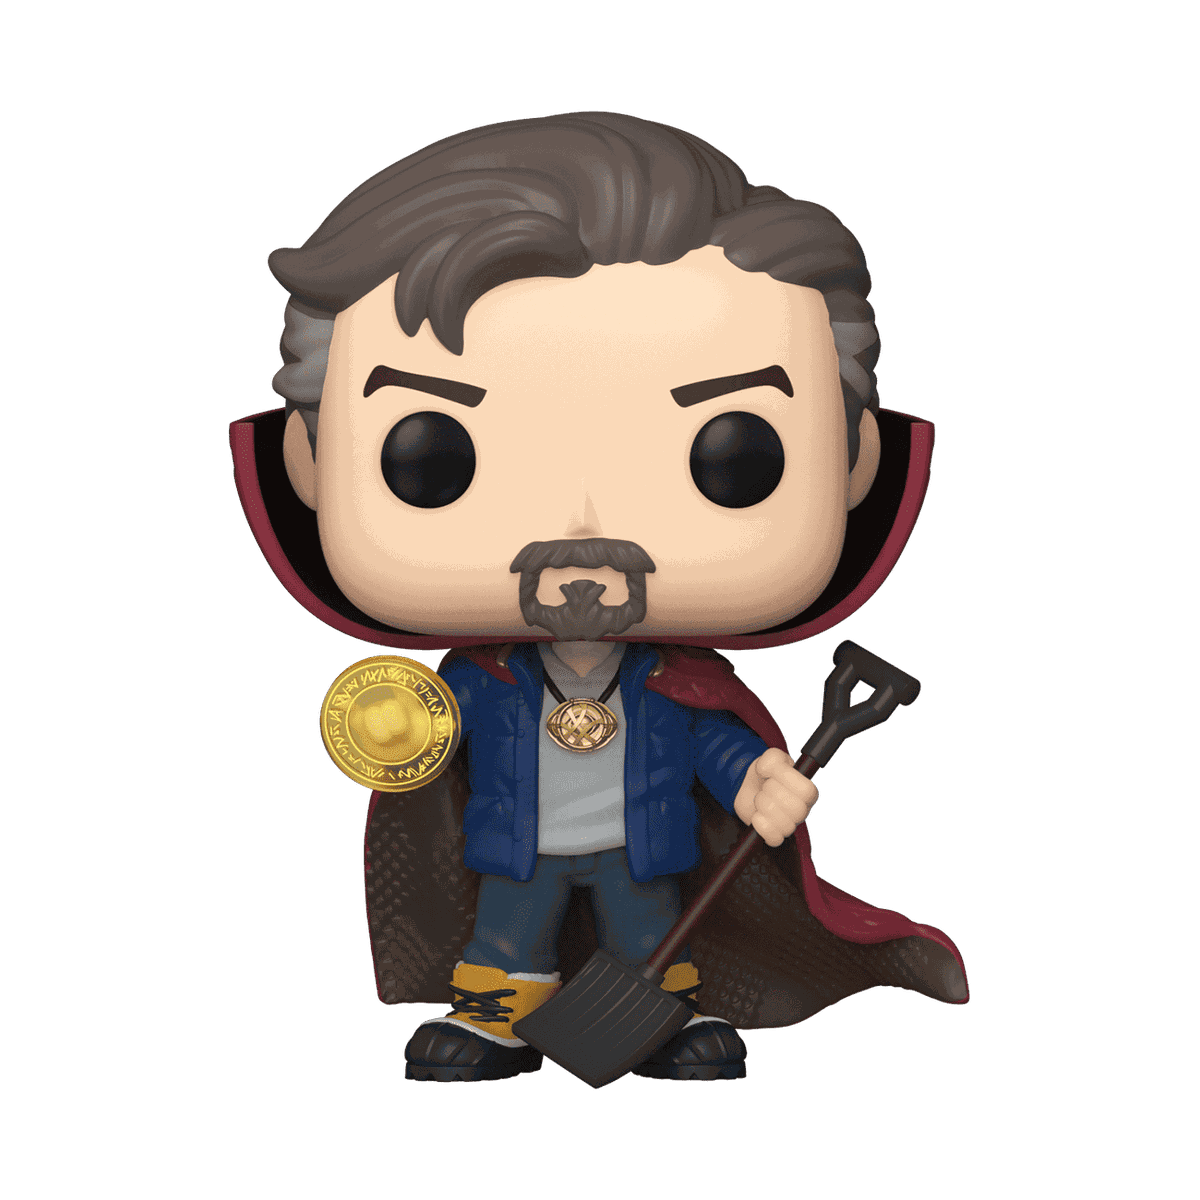 A Funko Pop of Dr. Strange from Spider-Man: No Way Home